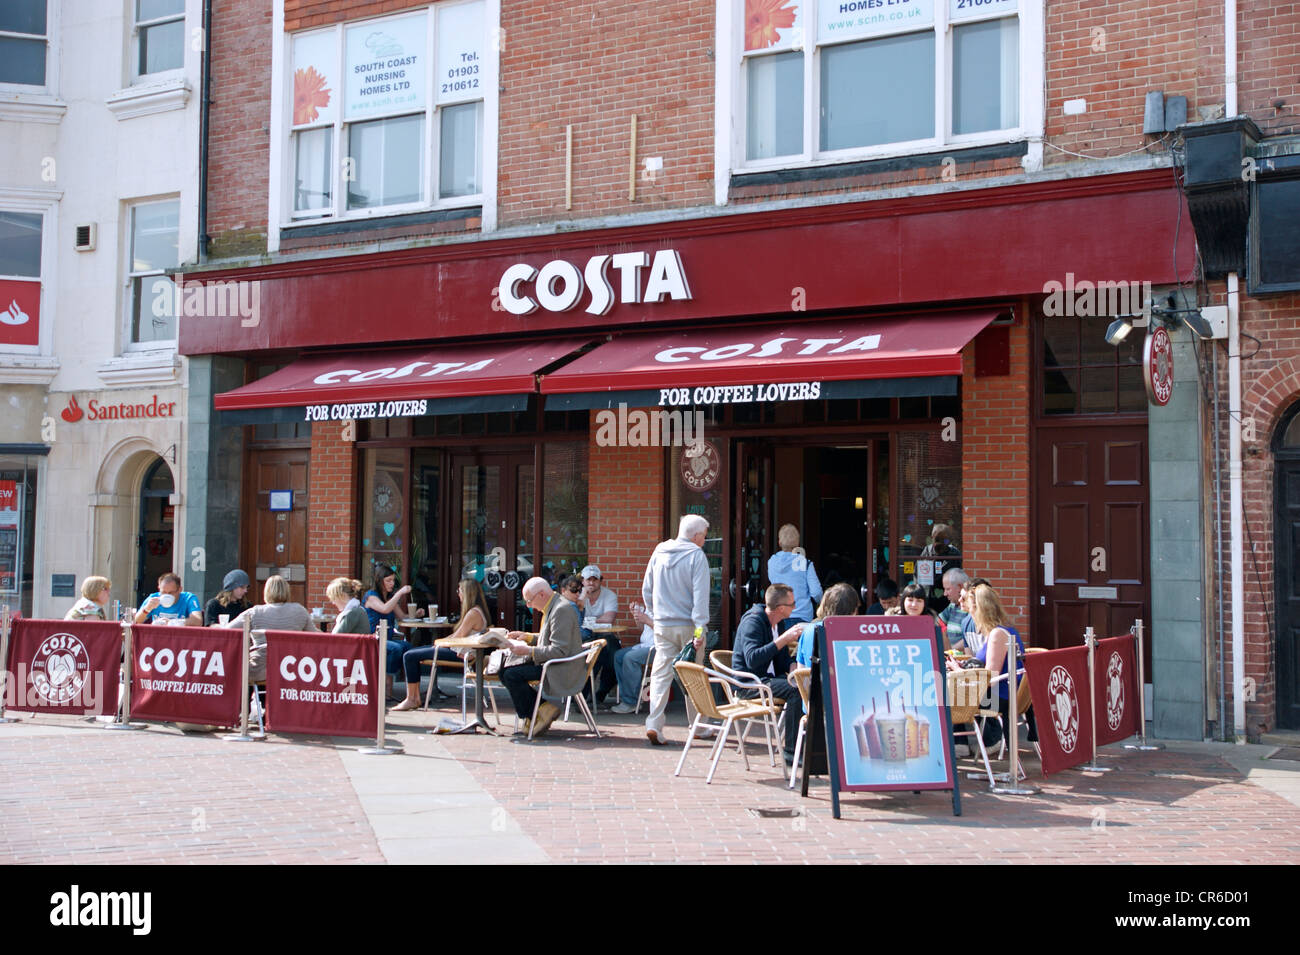 Costa Coffee shop retailers Worthing West Sussex UK Stock Photo - Alamy